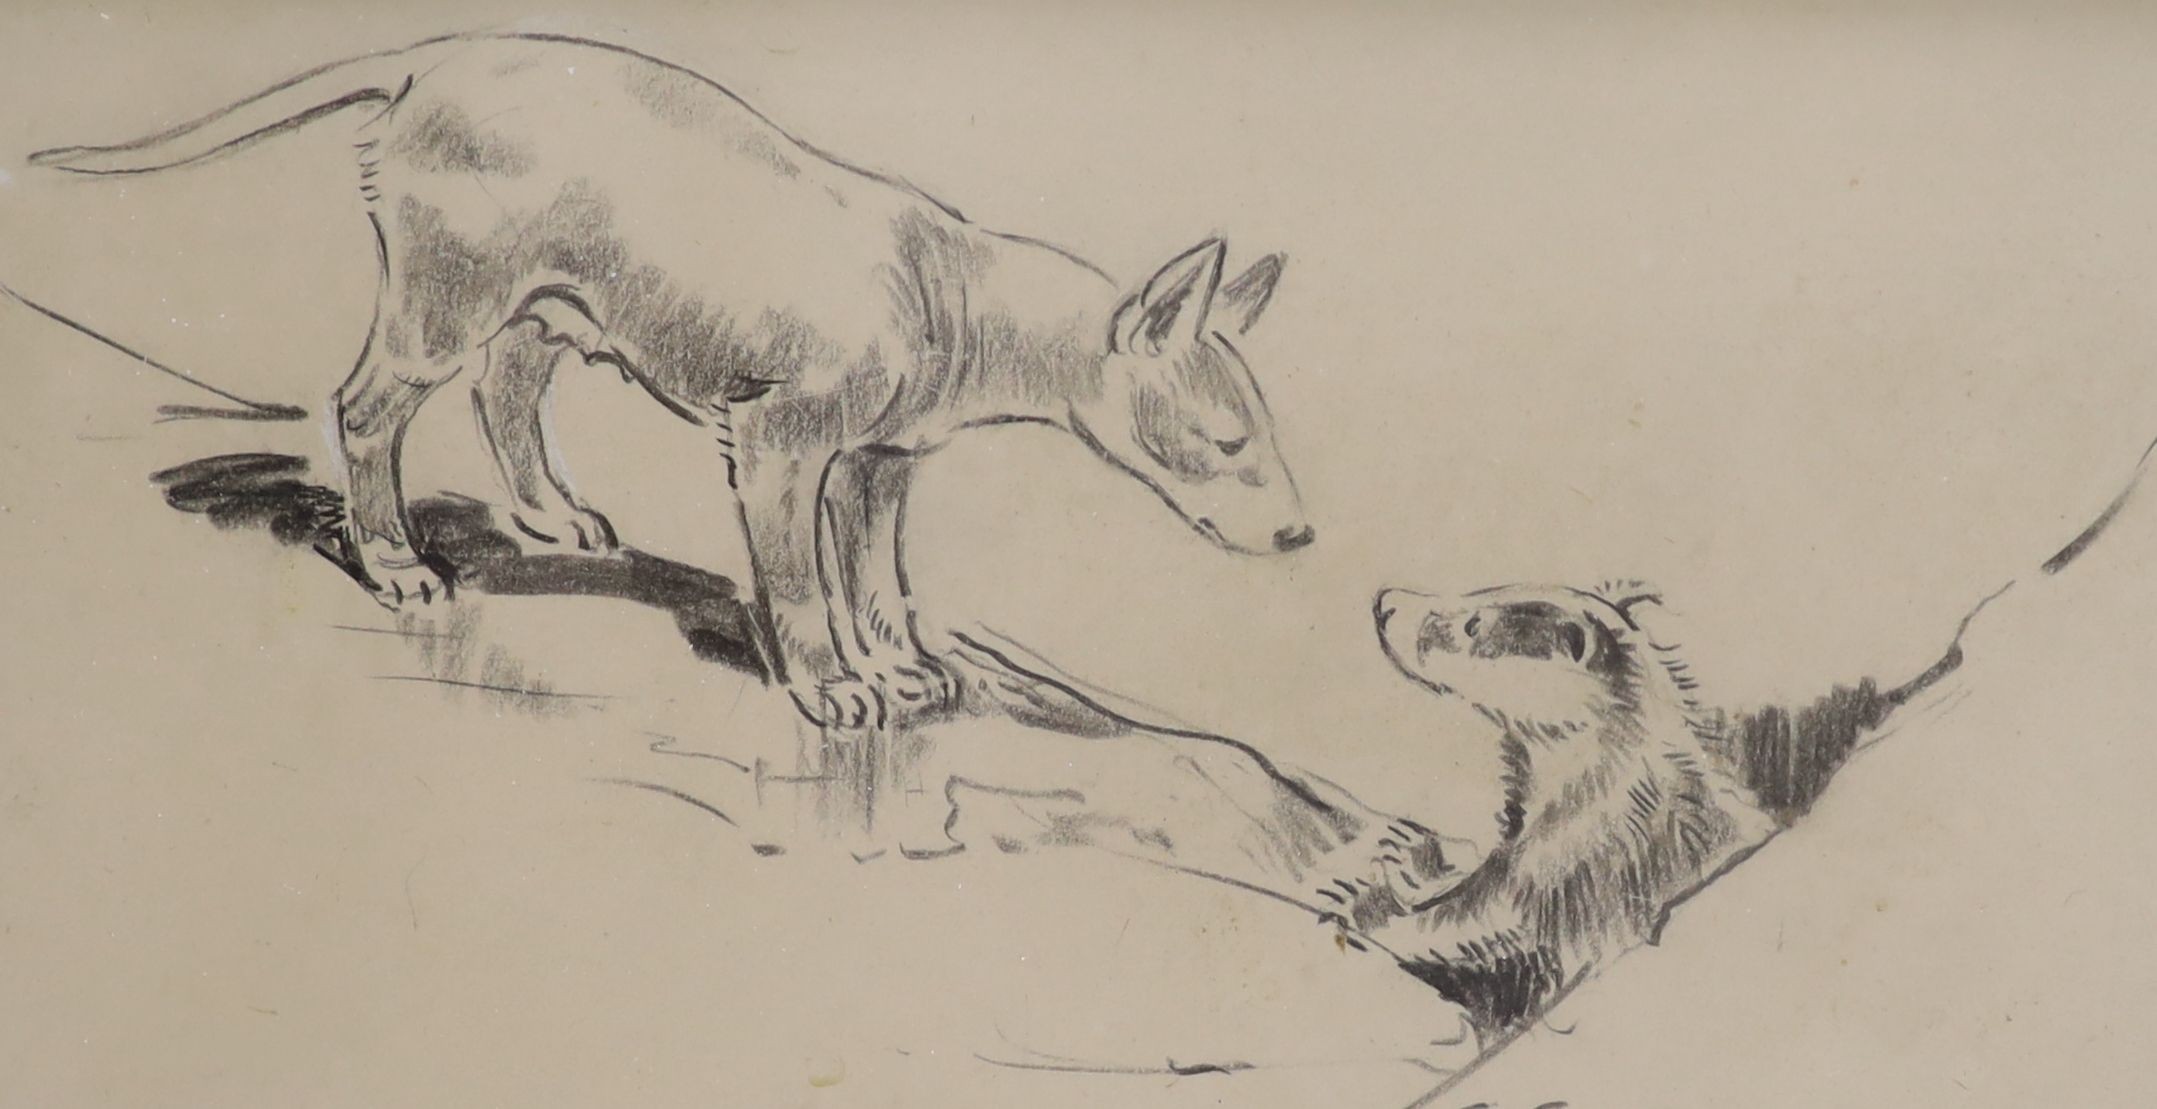 Eileen Alice Soper (1905-1990), two original pencil illustrations for the book ‘Bully and the Badger’ by Wickham Malins, initialled, 9 x 16.5cm, sold with a copy of the book